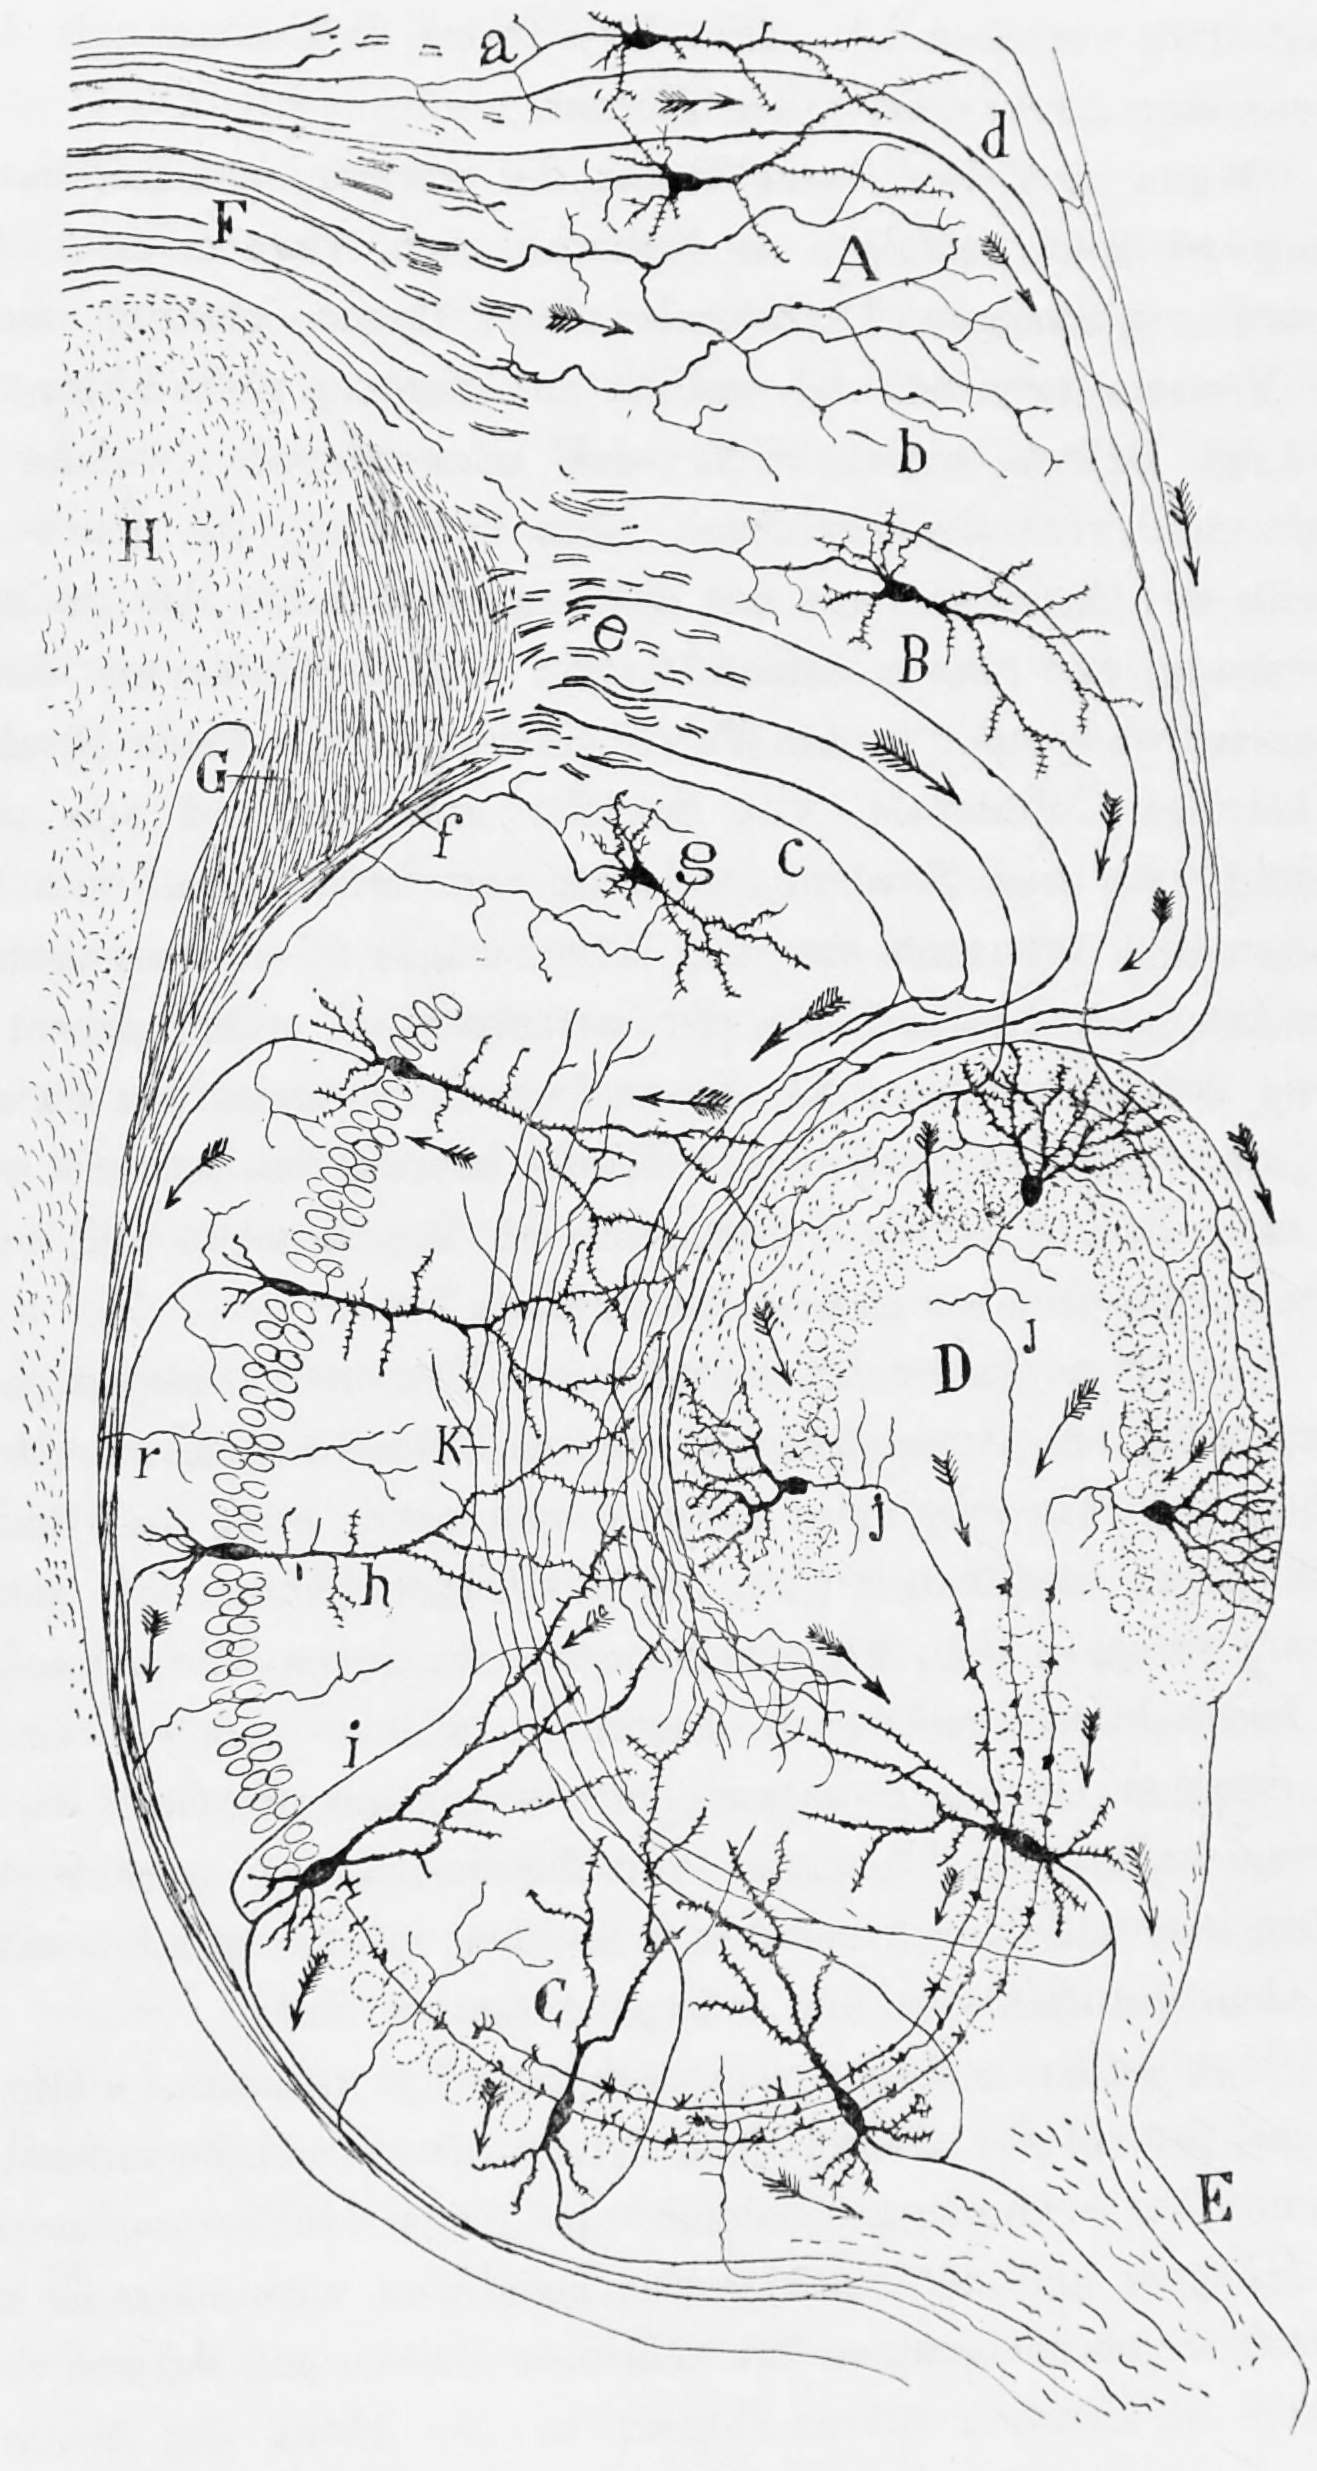 Diagram of the structure and connections of the hippocampus. A, Molecular layer of the subiculum. B, Pyramidal cell layer of the Subiculum. C, Hippocampus. D, Fascia dentata. E, Fimbria. F, Cingulum. G, H, Corpus callosum. a, axons entering the cingulum. From Histologie du système nerveux de l’homme & des vertébrés, Tome Premier (1909) by Santiago Ramón y Cajal translated from Spanish by Dr. L. Azoulay.